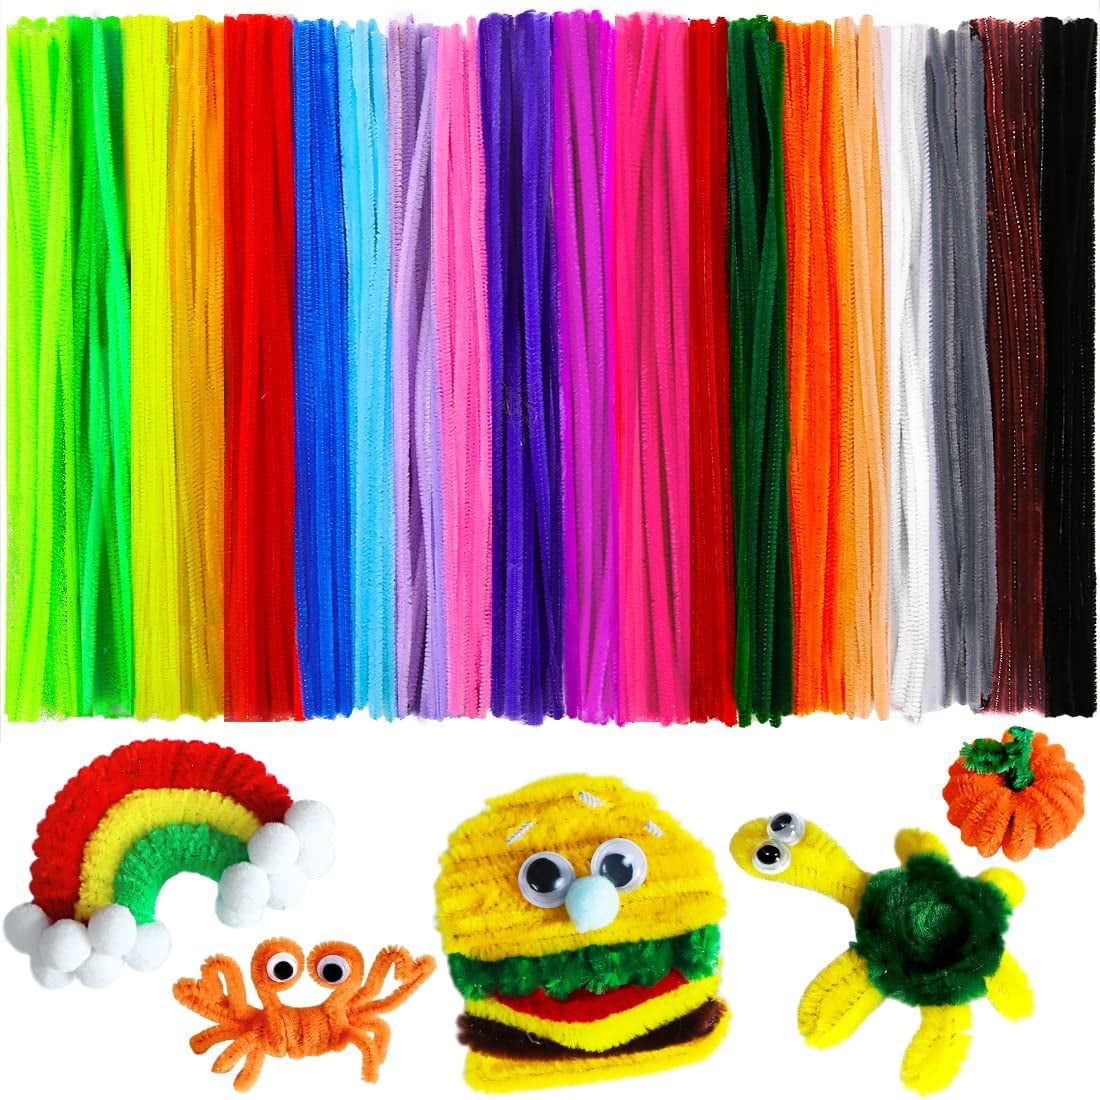 Colorations® 12 Pipe Cleaners - 1,000 Piece Value Pack, 10 colors